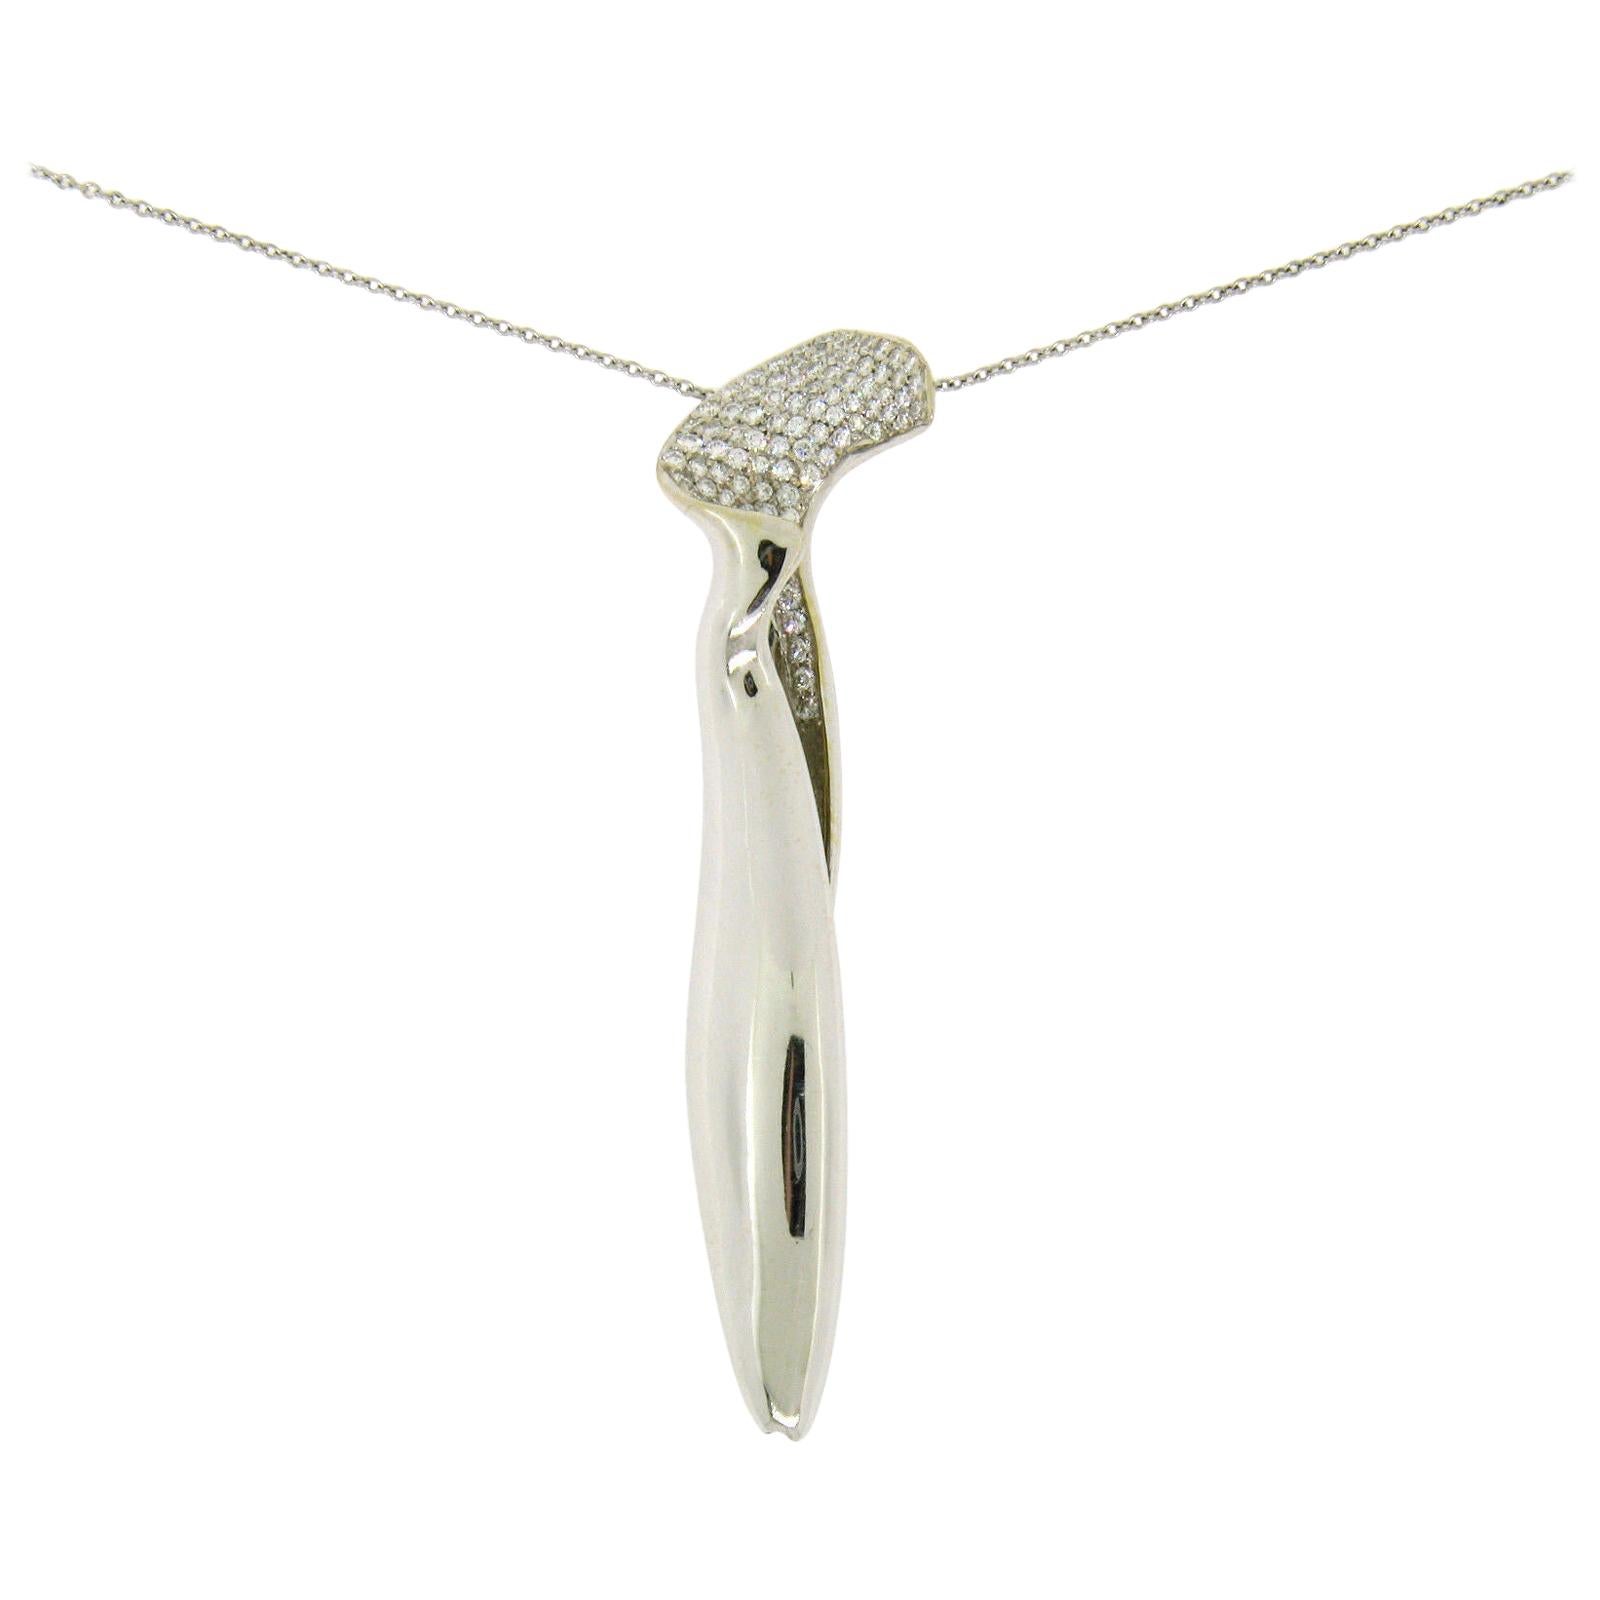 Tiffany & Co. Frank Gehry 18 Karat White Gold Orchid Diamond Pendant Necklace For Sale